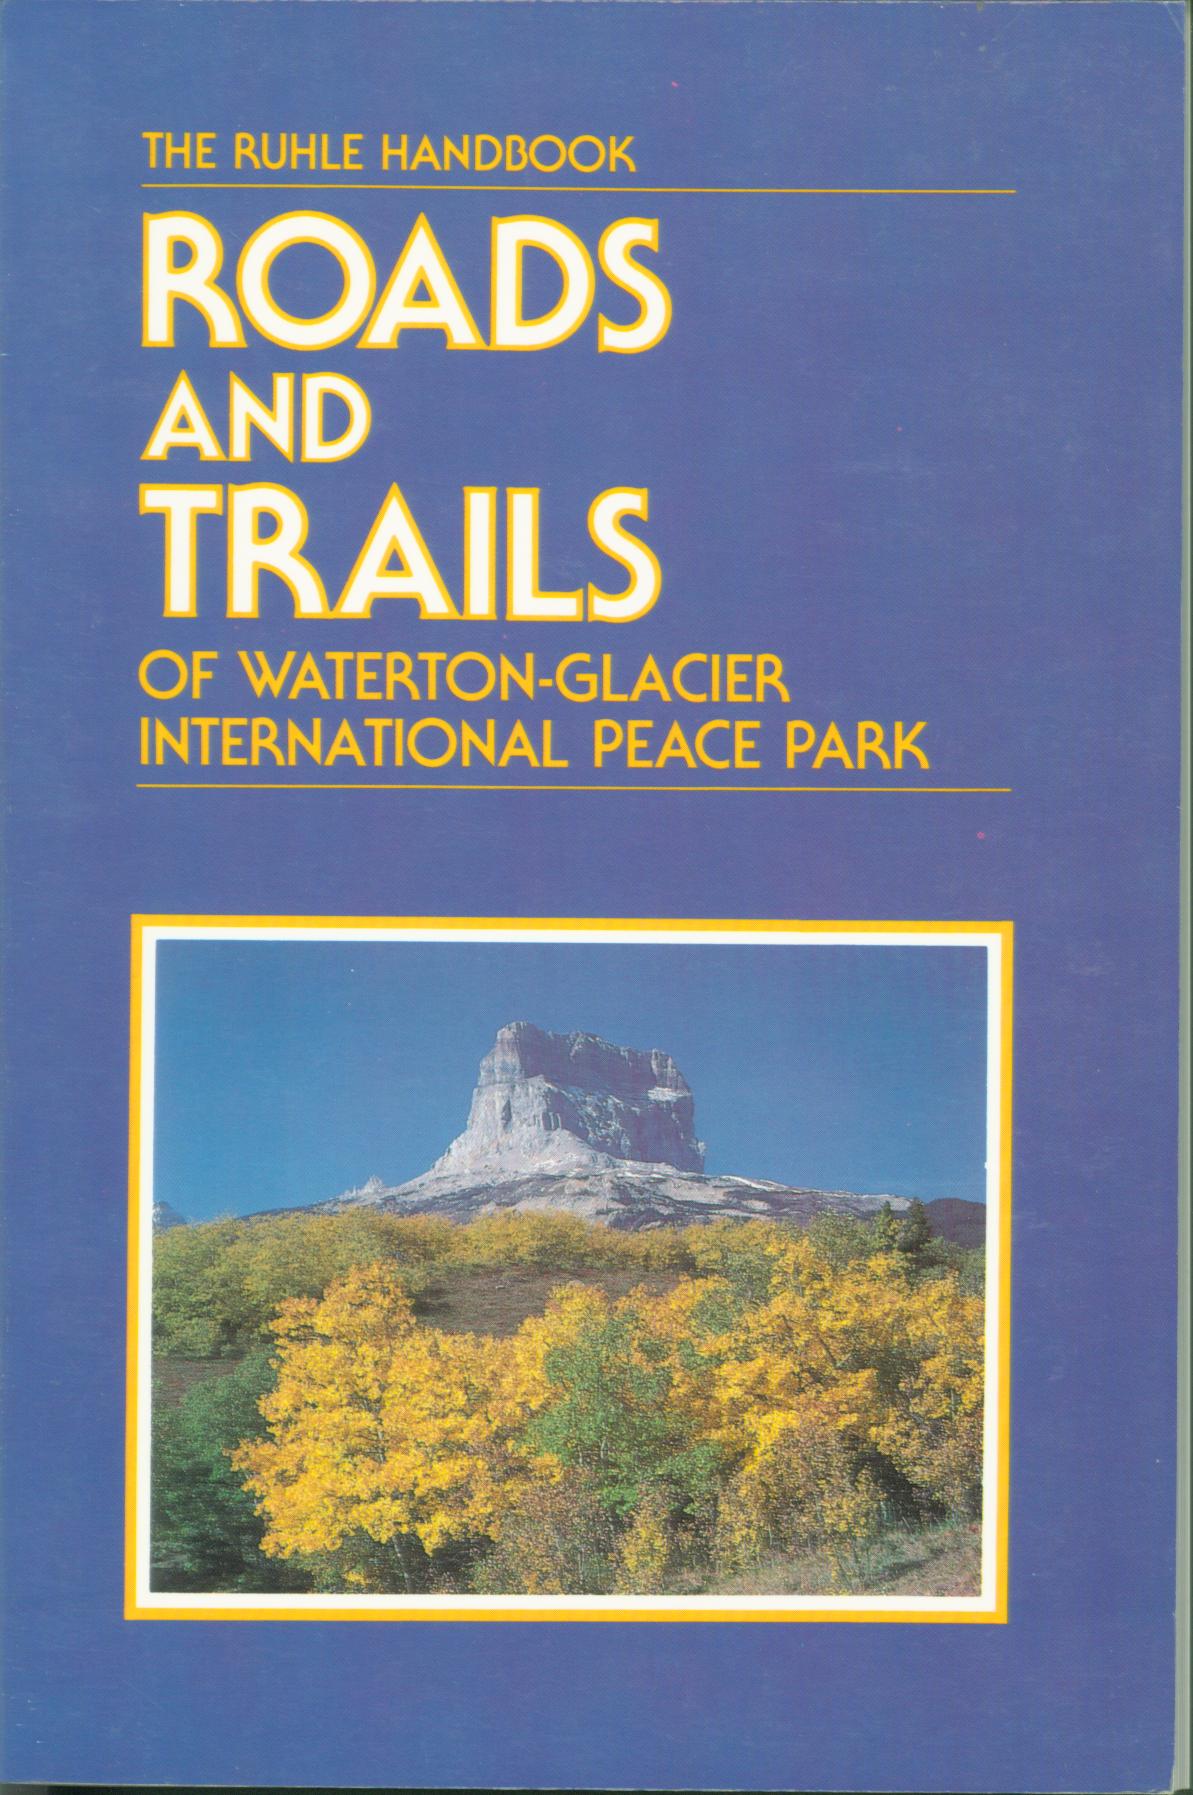 ROADS AND TRAILS OF WATERTON-GLACIER INTERNATIONAL PEACE PARK. 